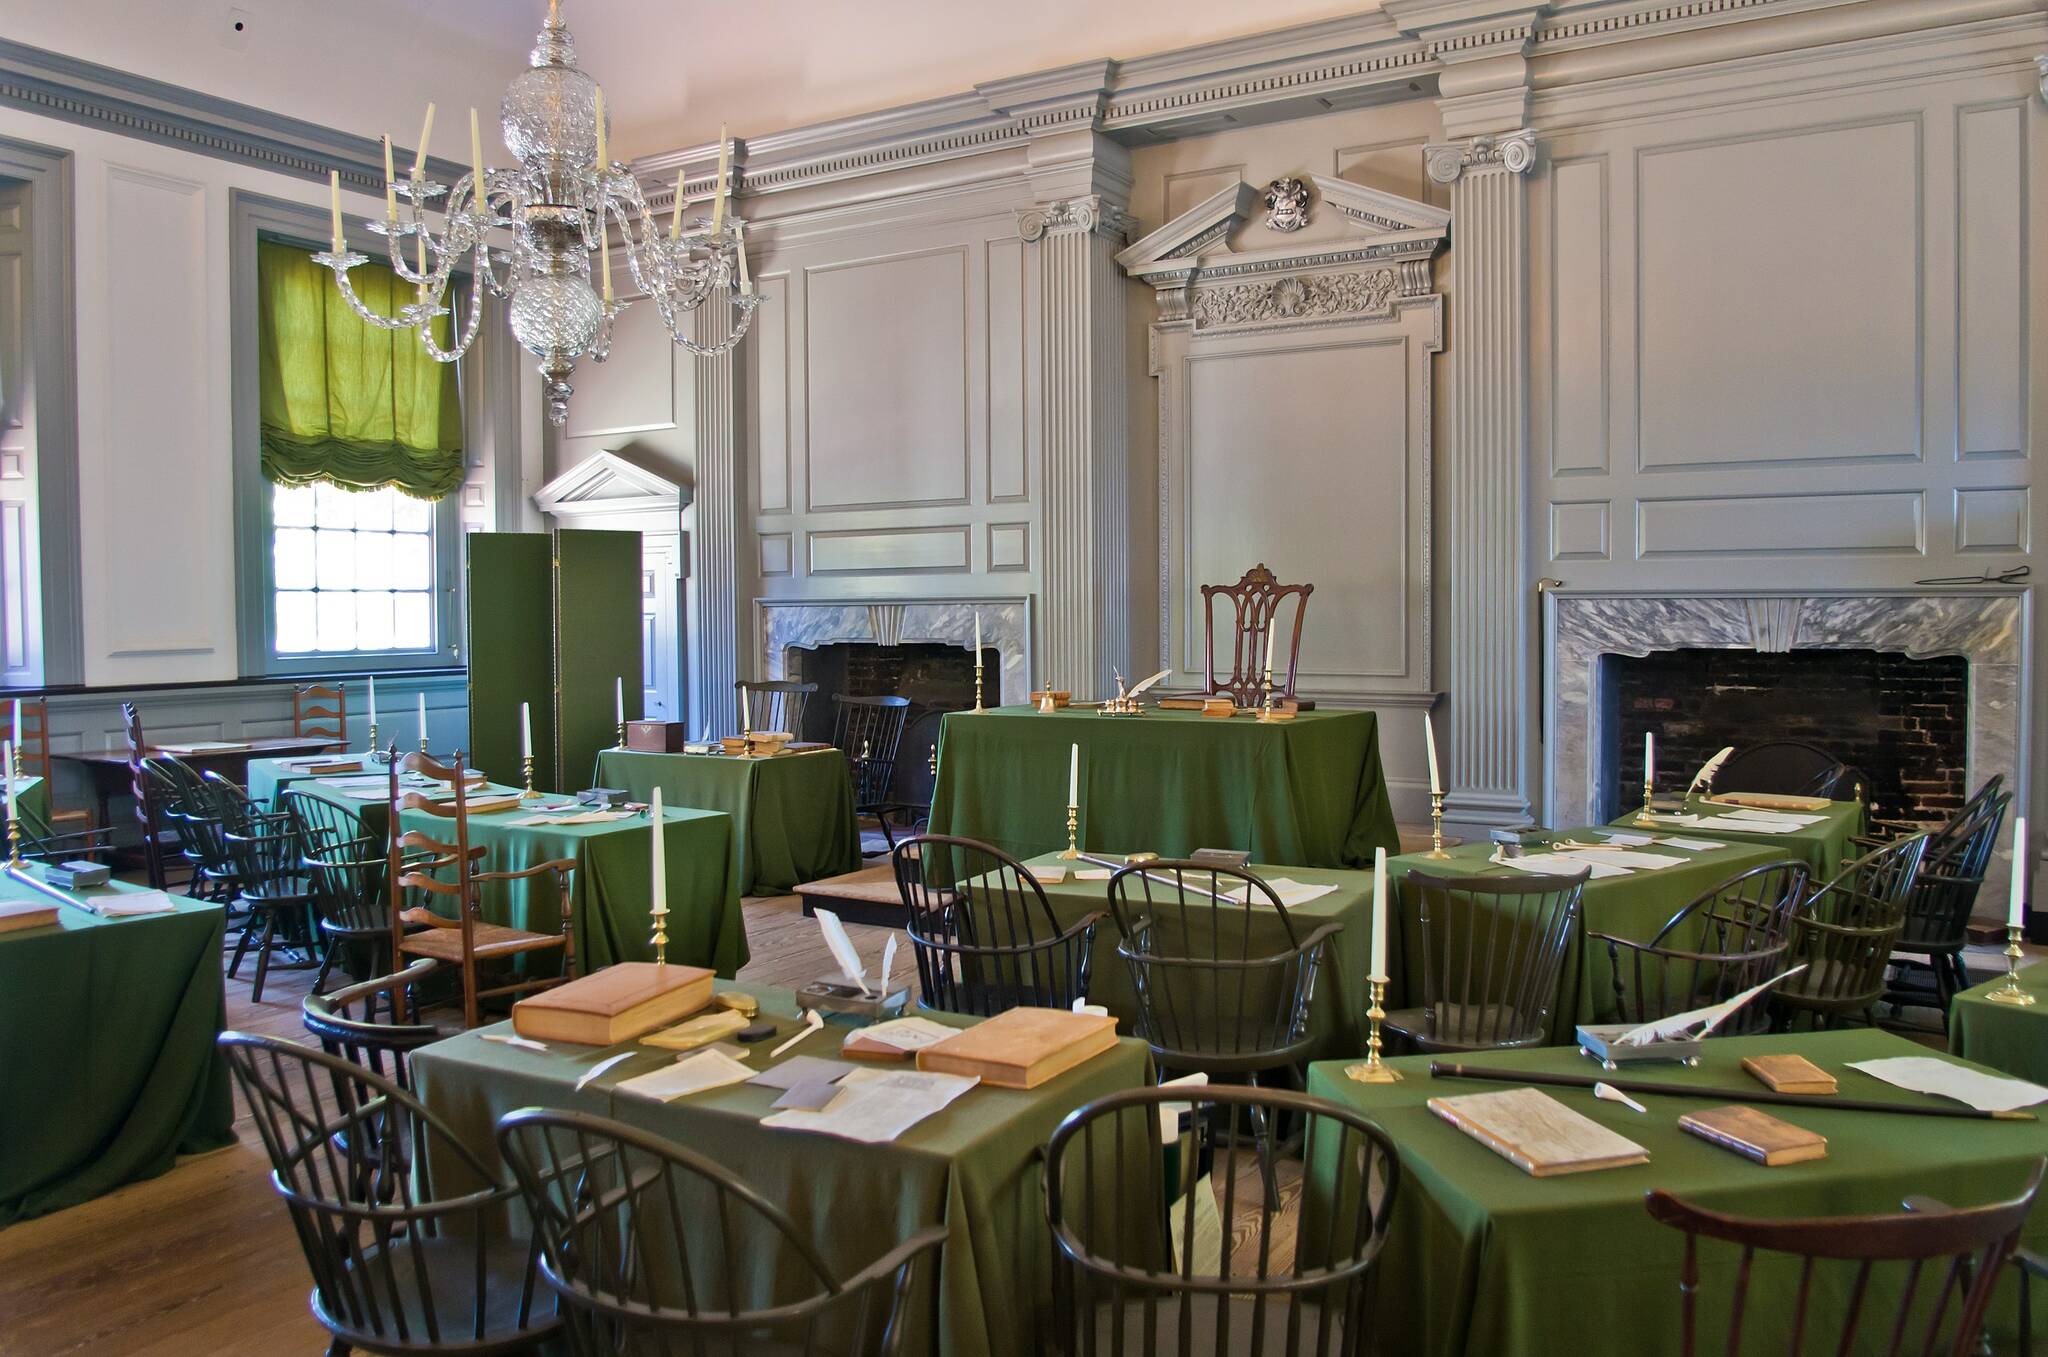 The Assembly Room at Independence Hall in Philadelphia, where the original U.S. Constitutional Convention took place. (Antonie Taveneaux / CC BY-SA 3.0)